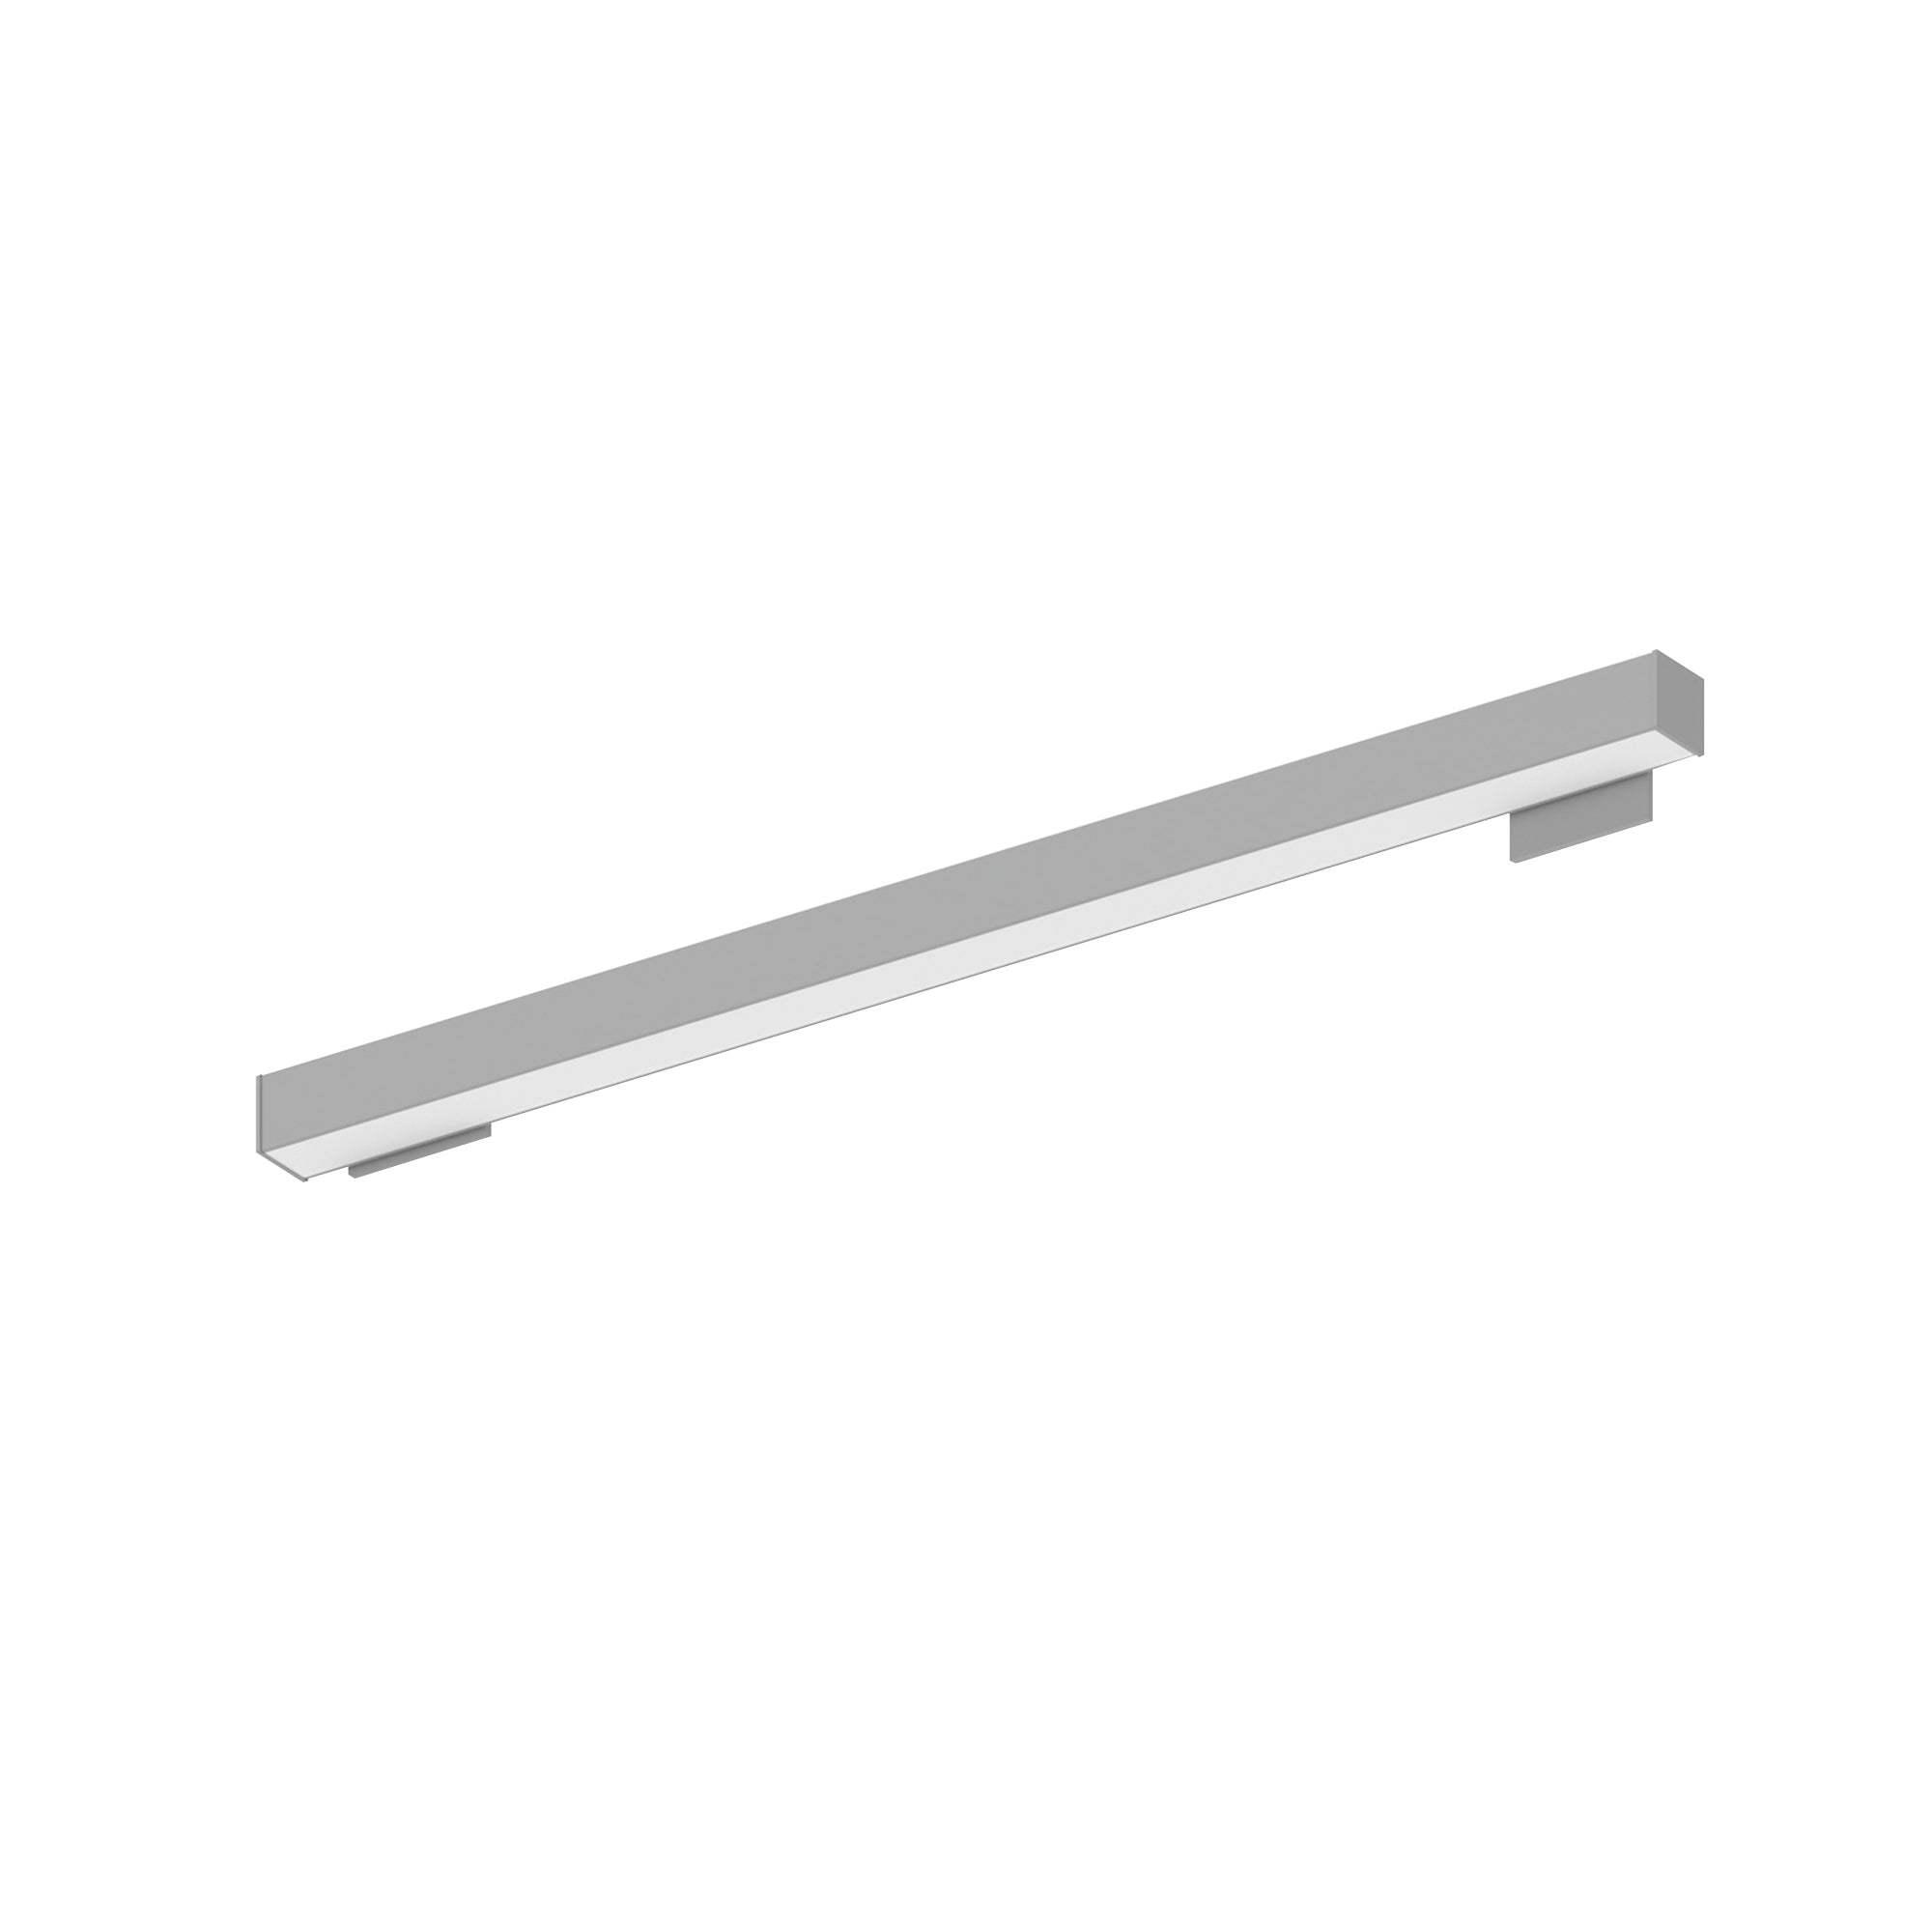 Nora Lighting NWLIN-41040A/L2-R4 - Linear - 4' L-Line LED Wall Mount Linear, 4200lm / 4000K, 2 Inchx4 Inch Left Plate & 4 Inchx4 Inch Right Plate, Aluminum Finish